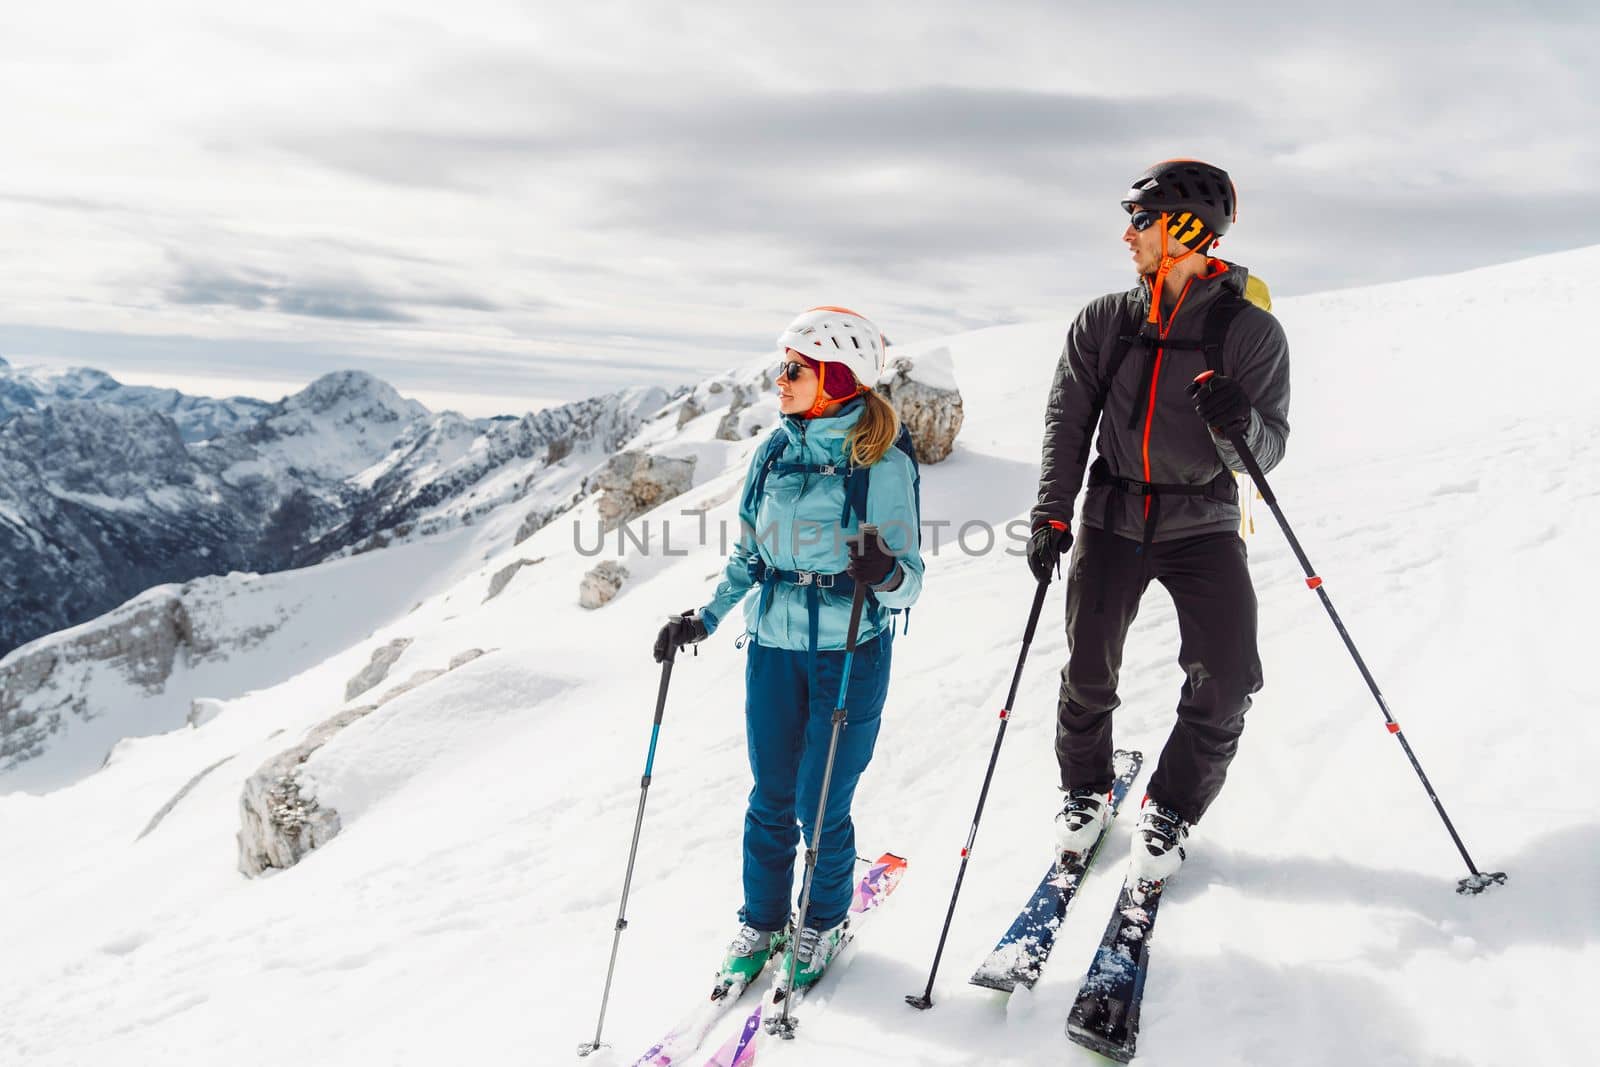 Woman ski tourer and man ski tourer looking at the views of the mountains from high up by VisualProductions